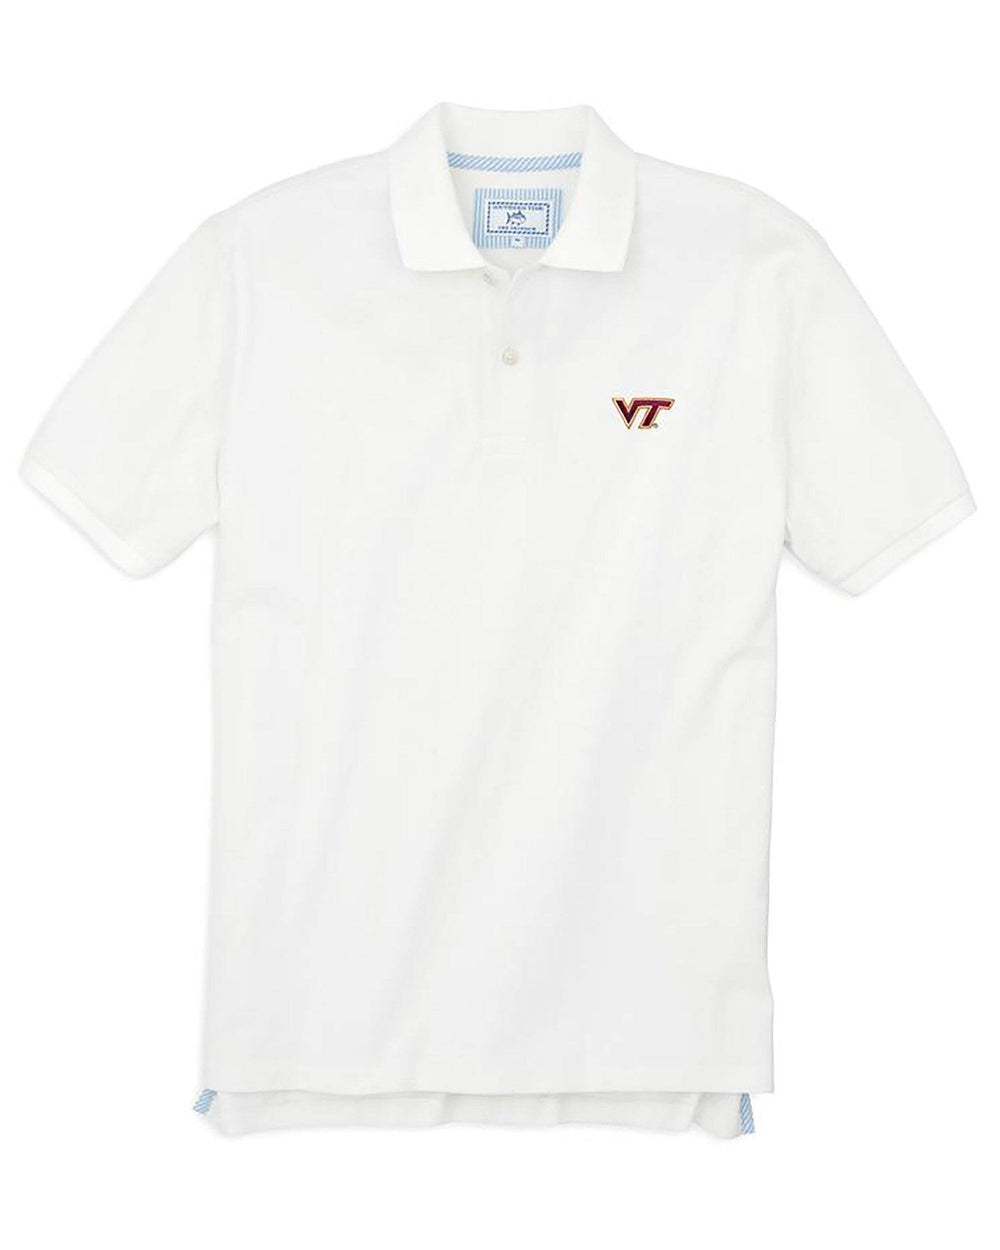 The front view of the Men's White Virginia Tech Hokies Pique Polo Shirt by Southern Tide - Classic White